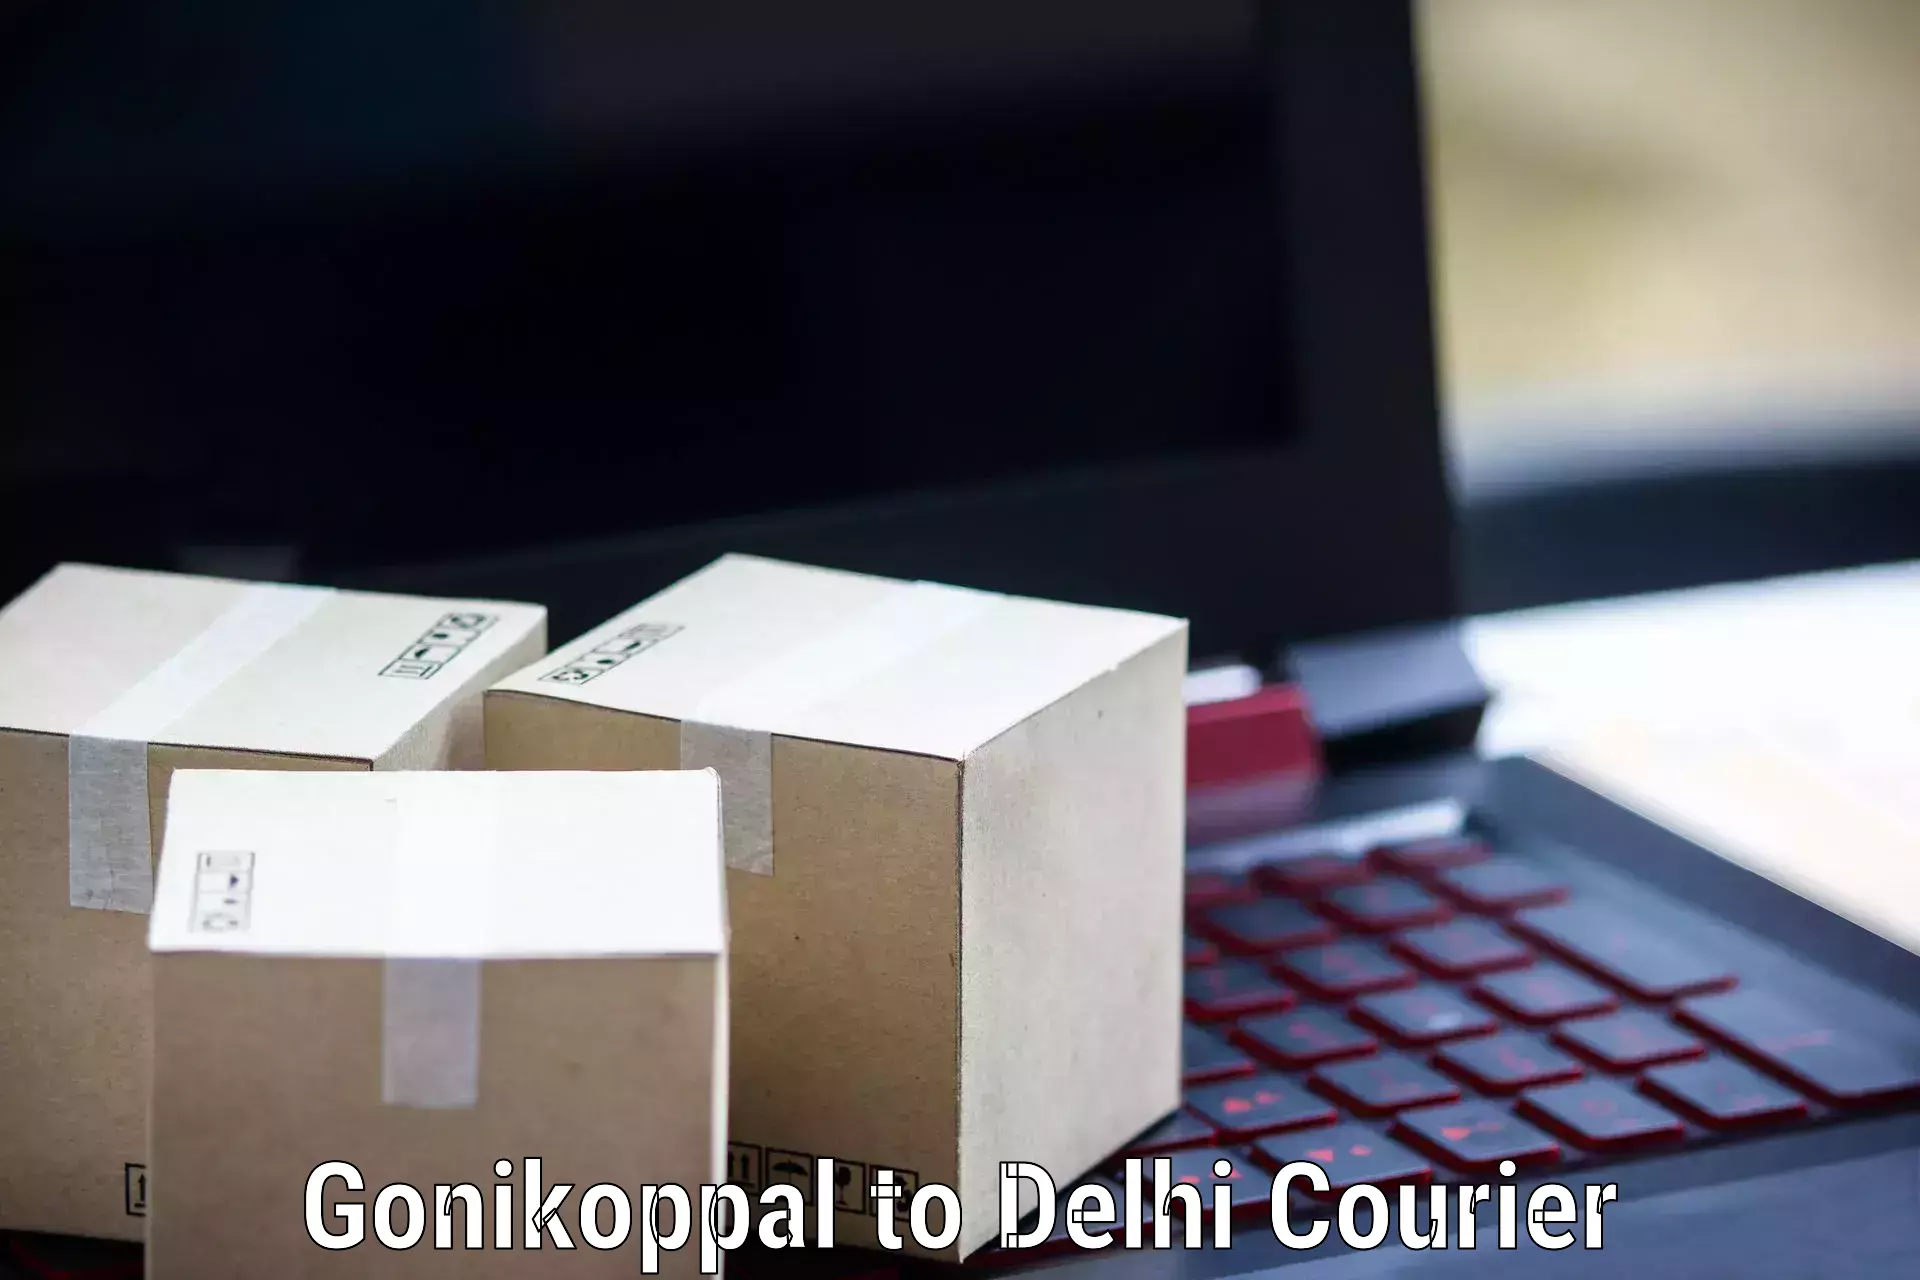 Global courier networks Gonikoppal to IIT Delhi